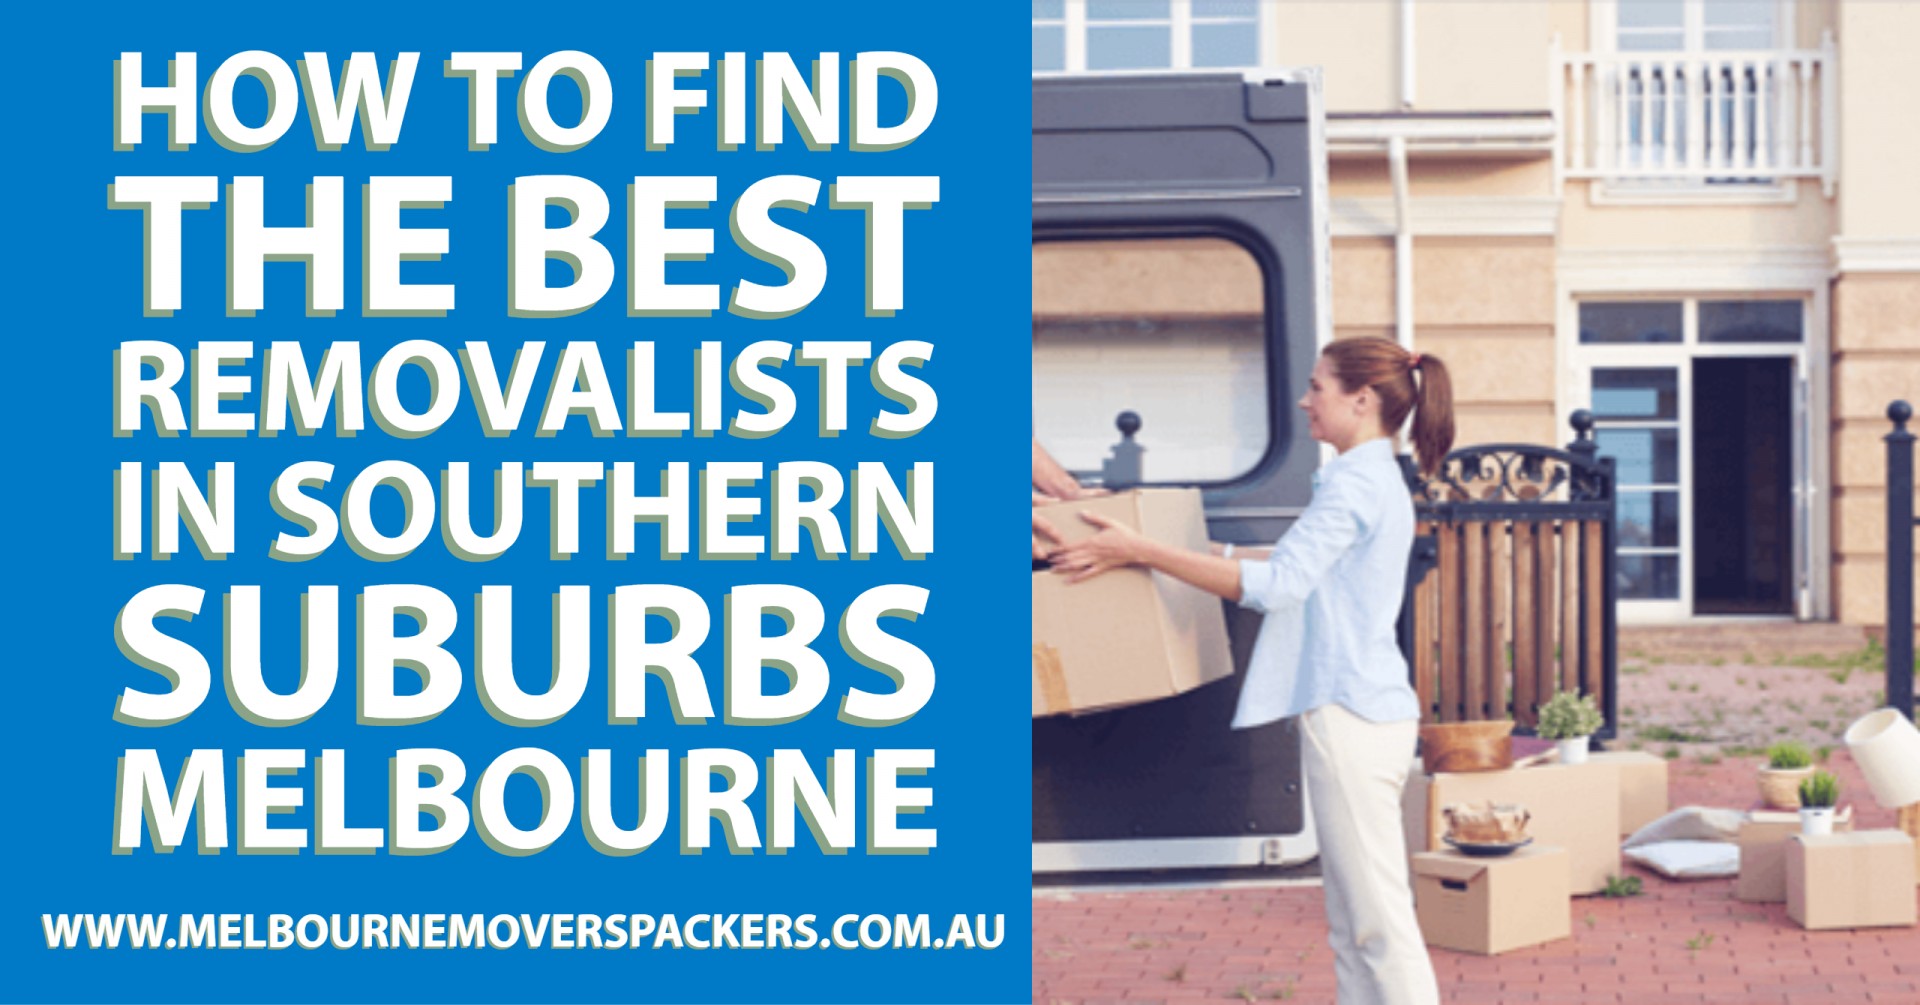 How to Find the Best Removalists in Southern Suburbs Melbourne